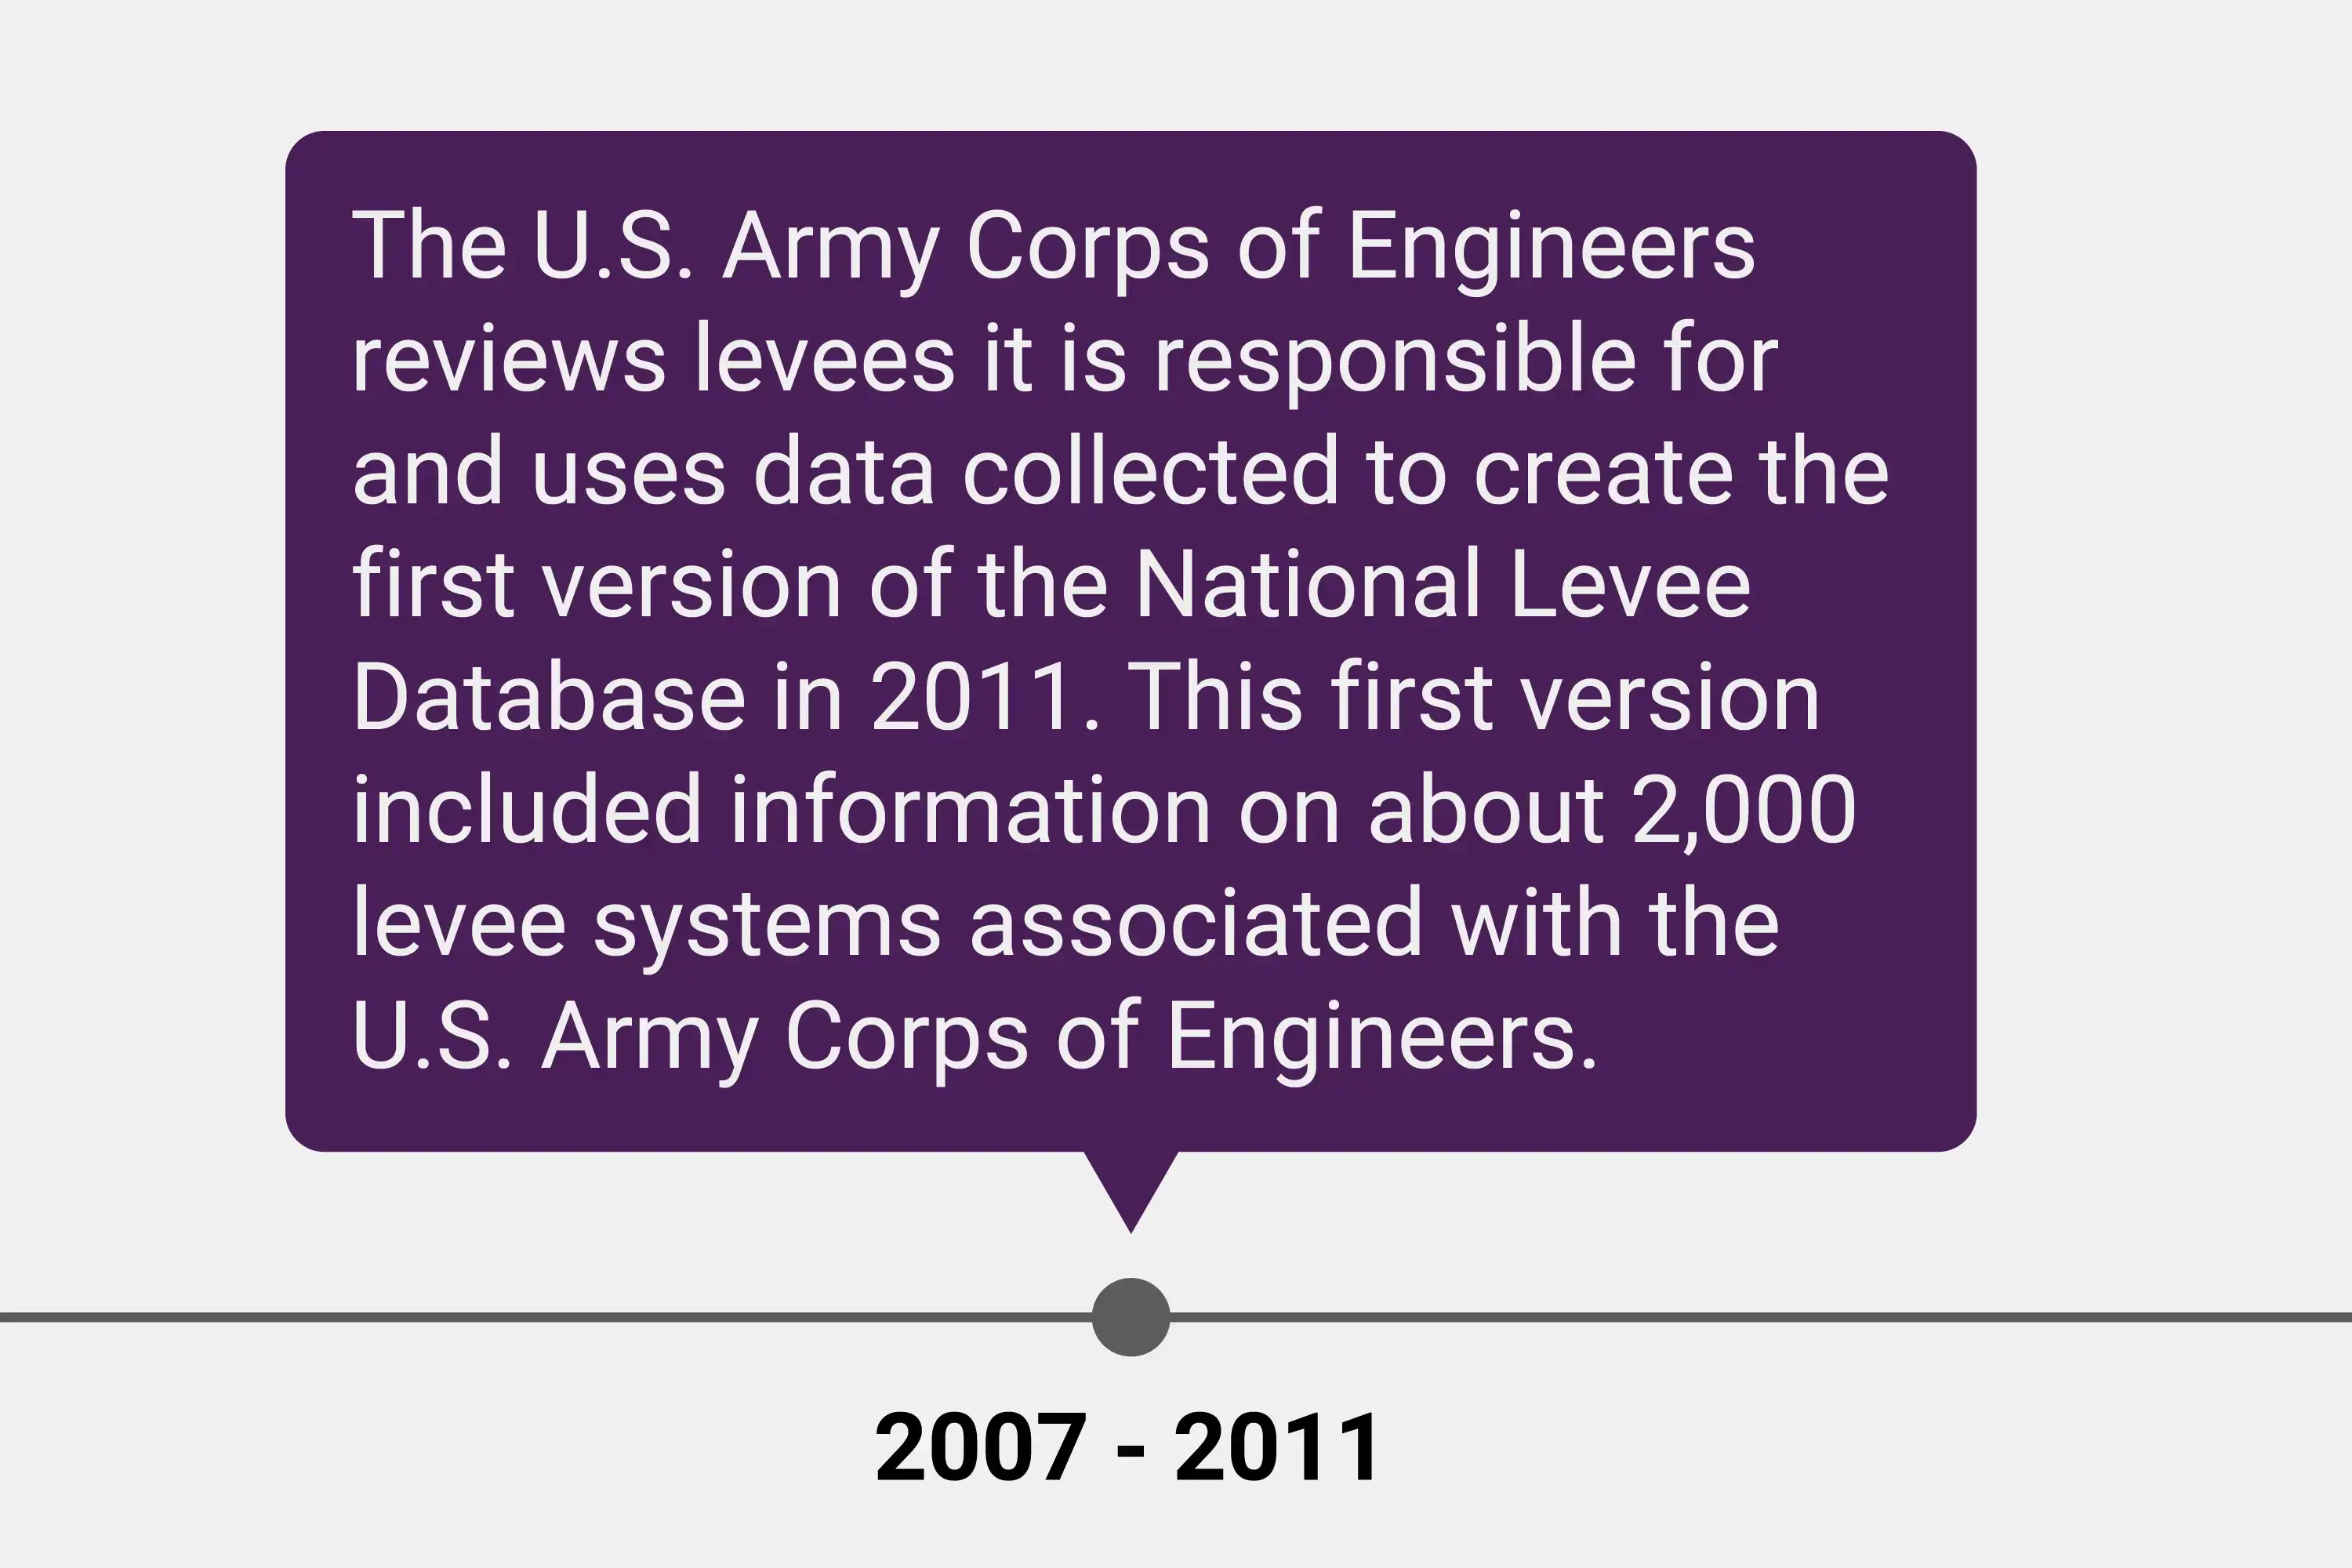 History of National Levee Database up to 2007-2011.